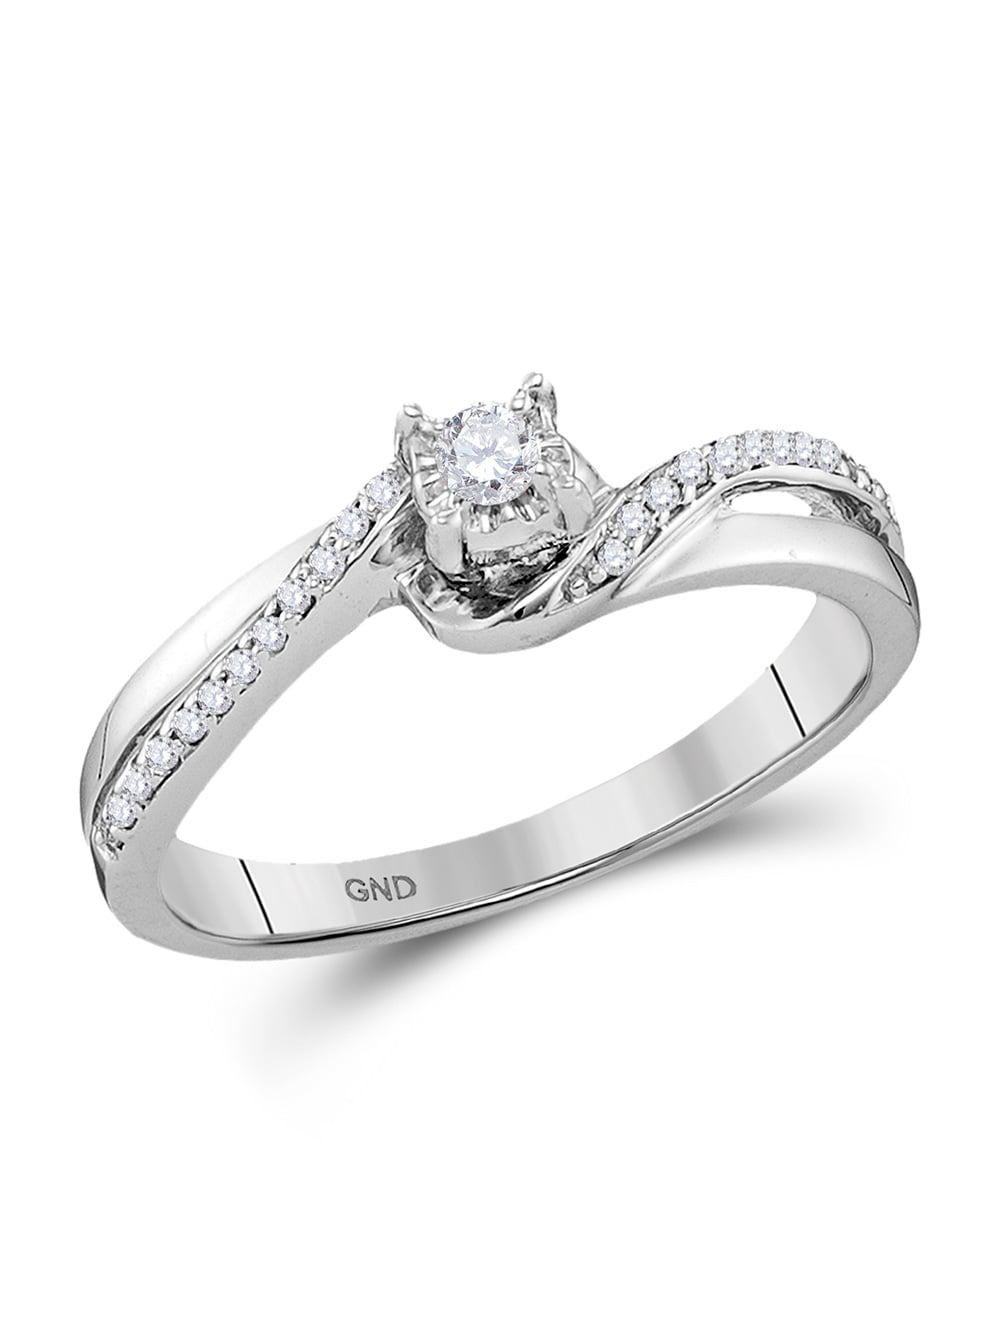 Details about   3Ct White Princess Bar Set Diamond Engagement Wedding Ring 925 Sterling Silver